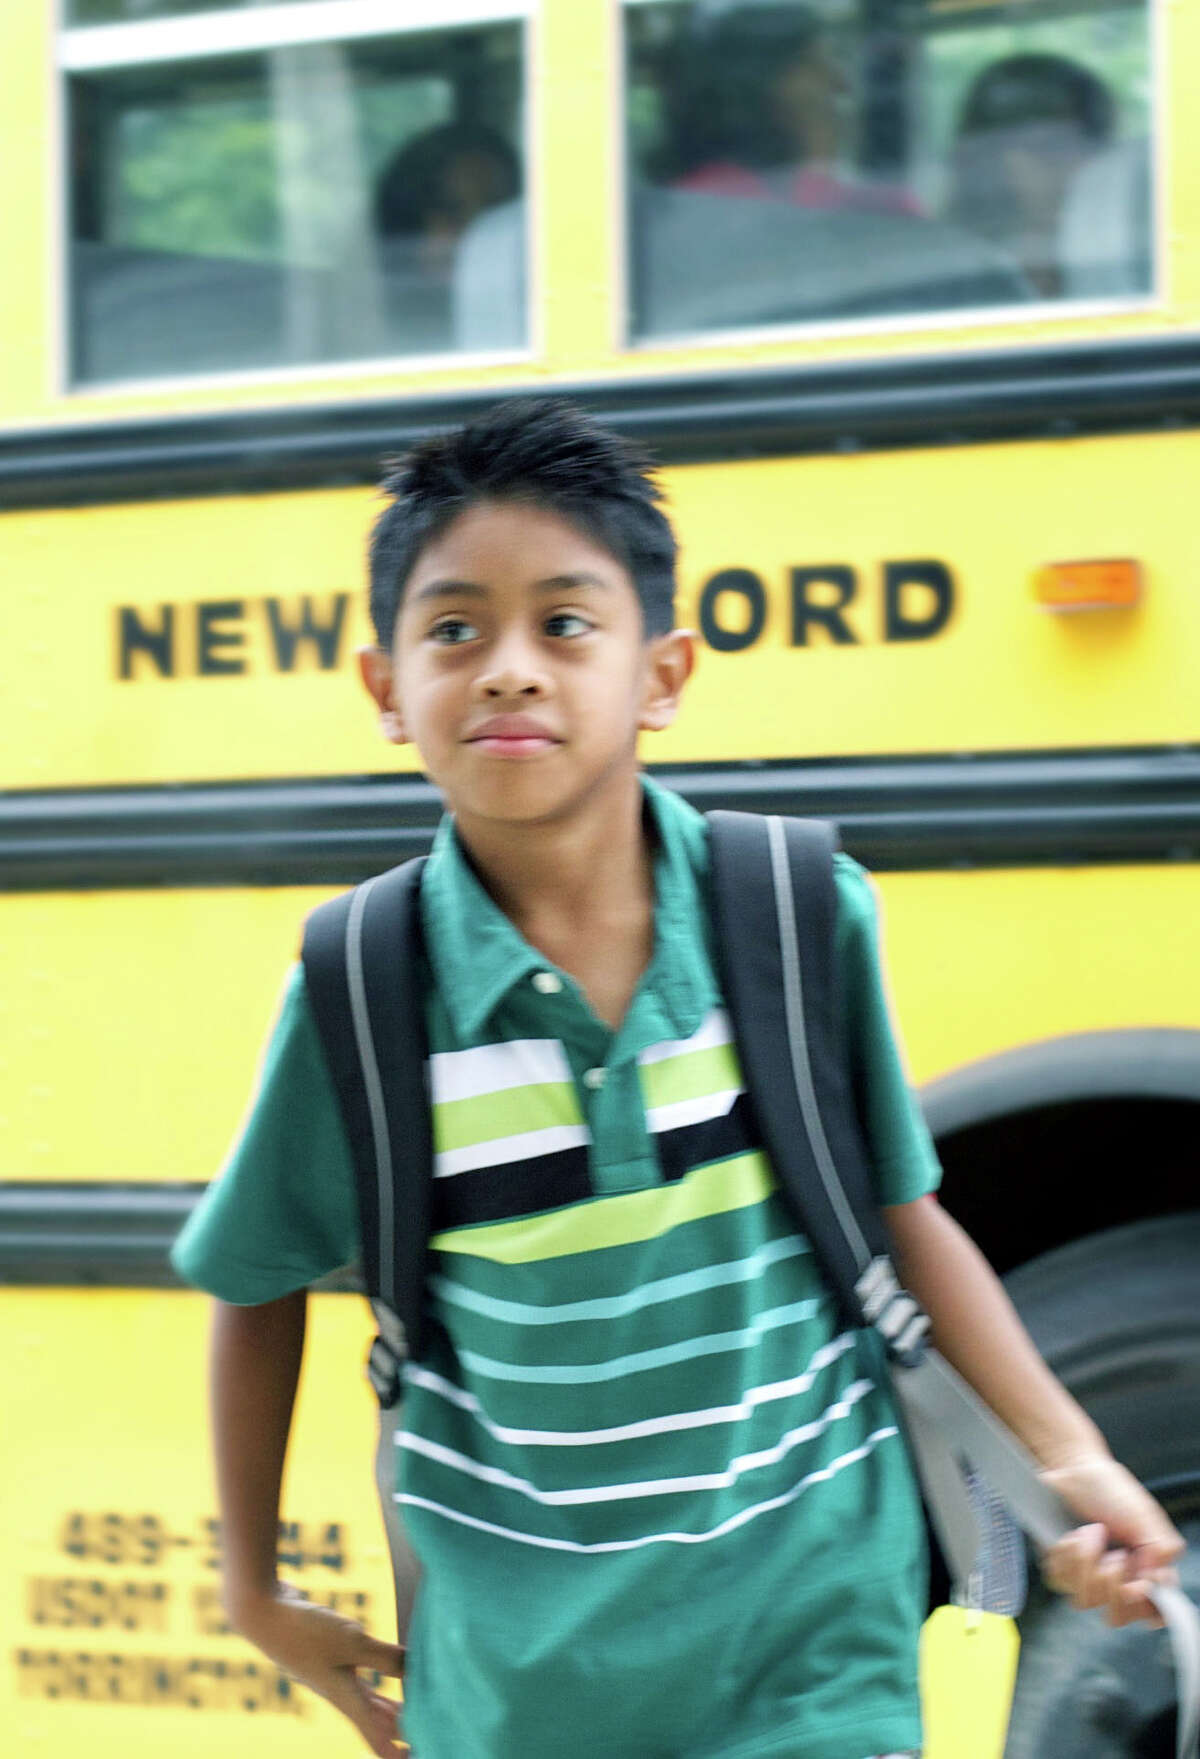 Second-grader Matty Napoli strides from his school bus with confidence as he and his fellow John Pettibone School School students start the 2013-14 school year in New Milford.